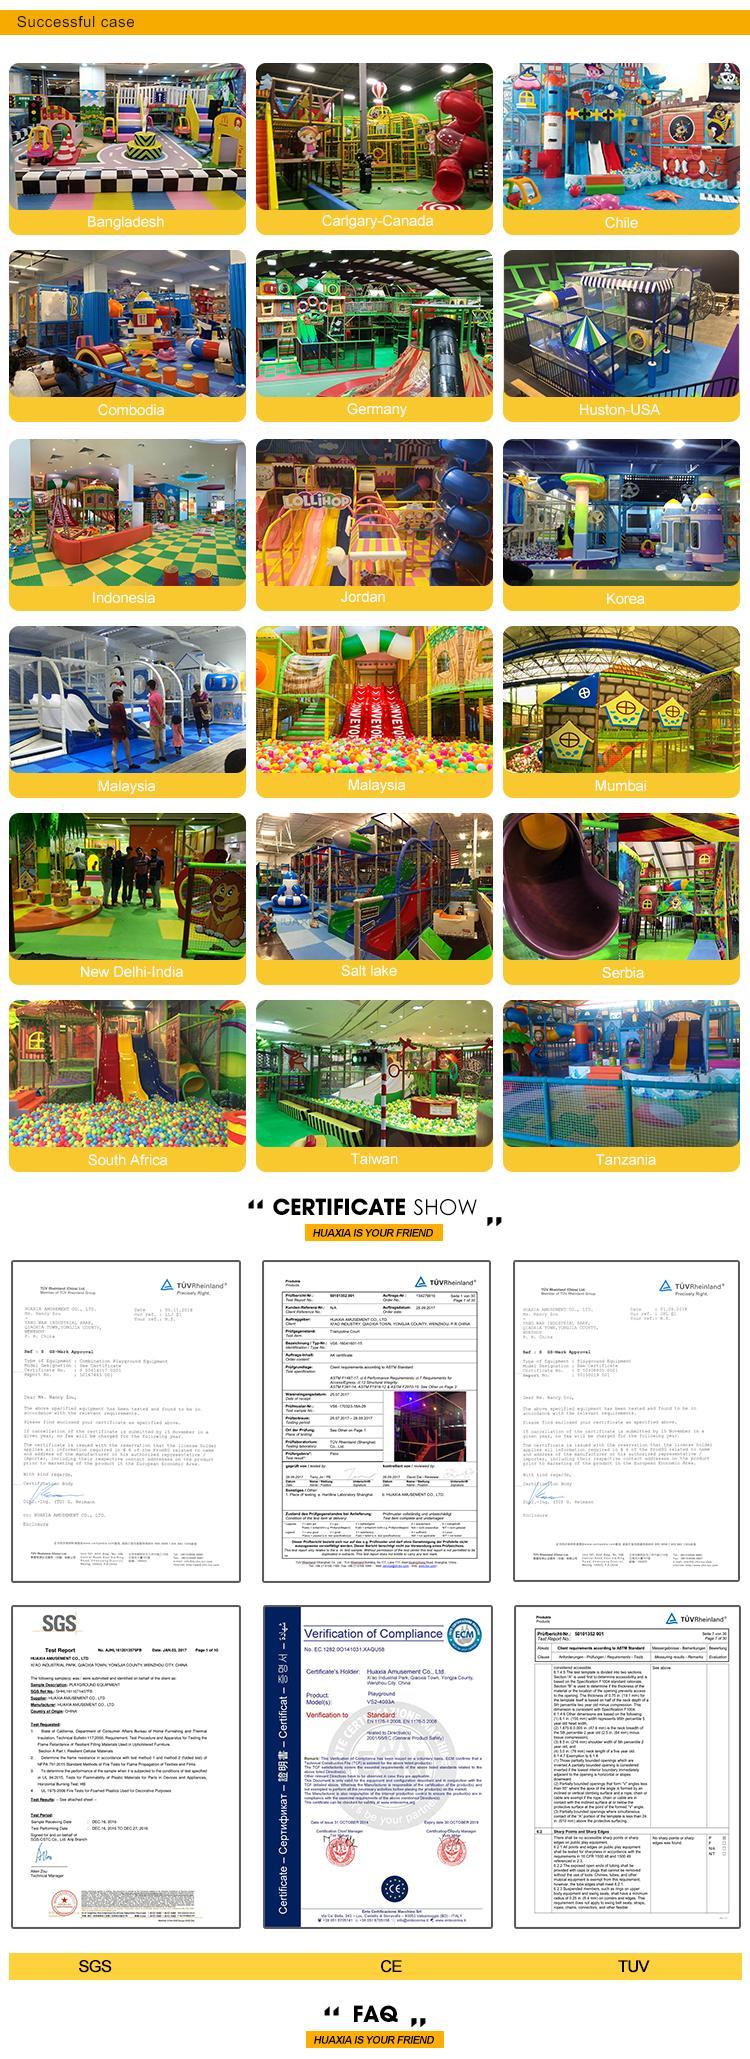 China Vasia Cheap and High Quality Indoor&Outdoor Gymnastic Trampoline Park with Ninja Warrior